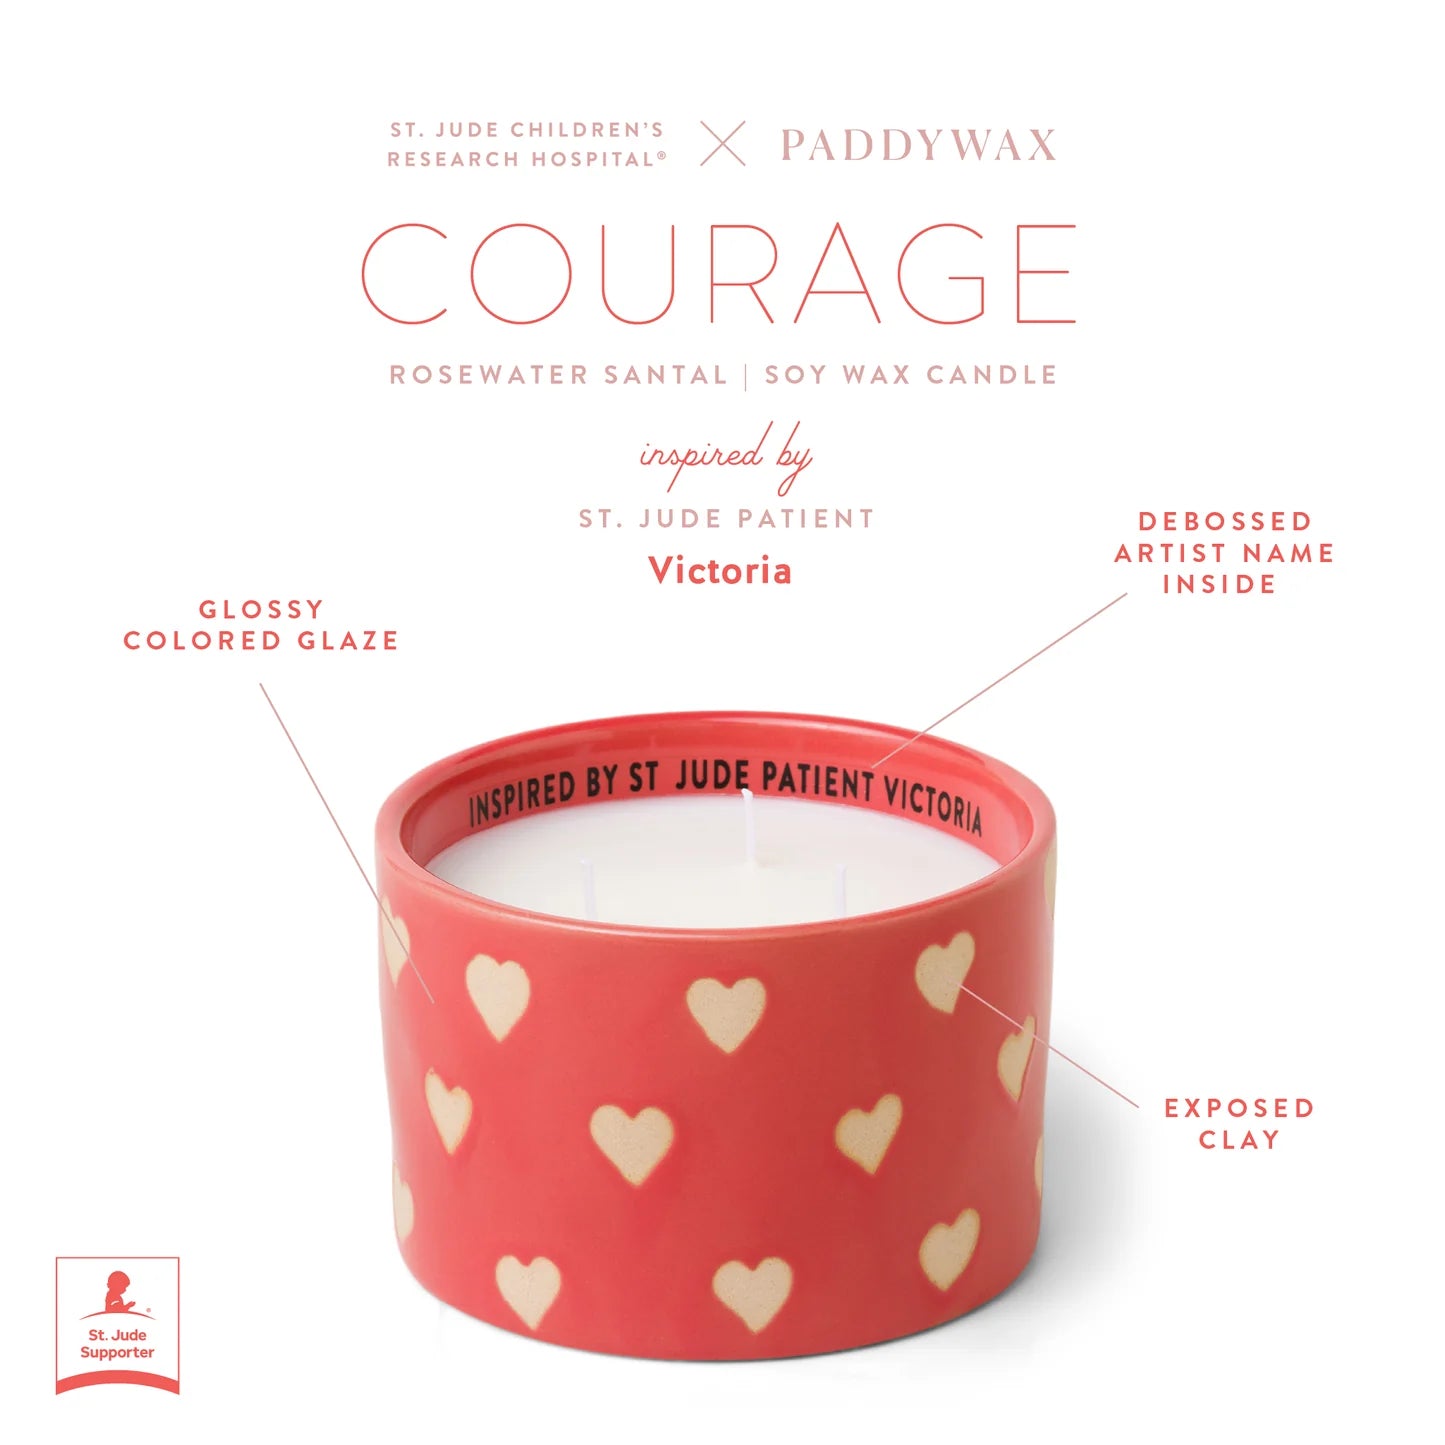 St. Jude Giveback "Courage" 11 oz. Candle - Rosewater Santal